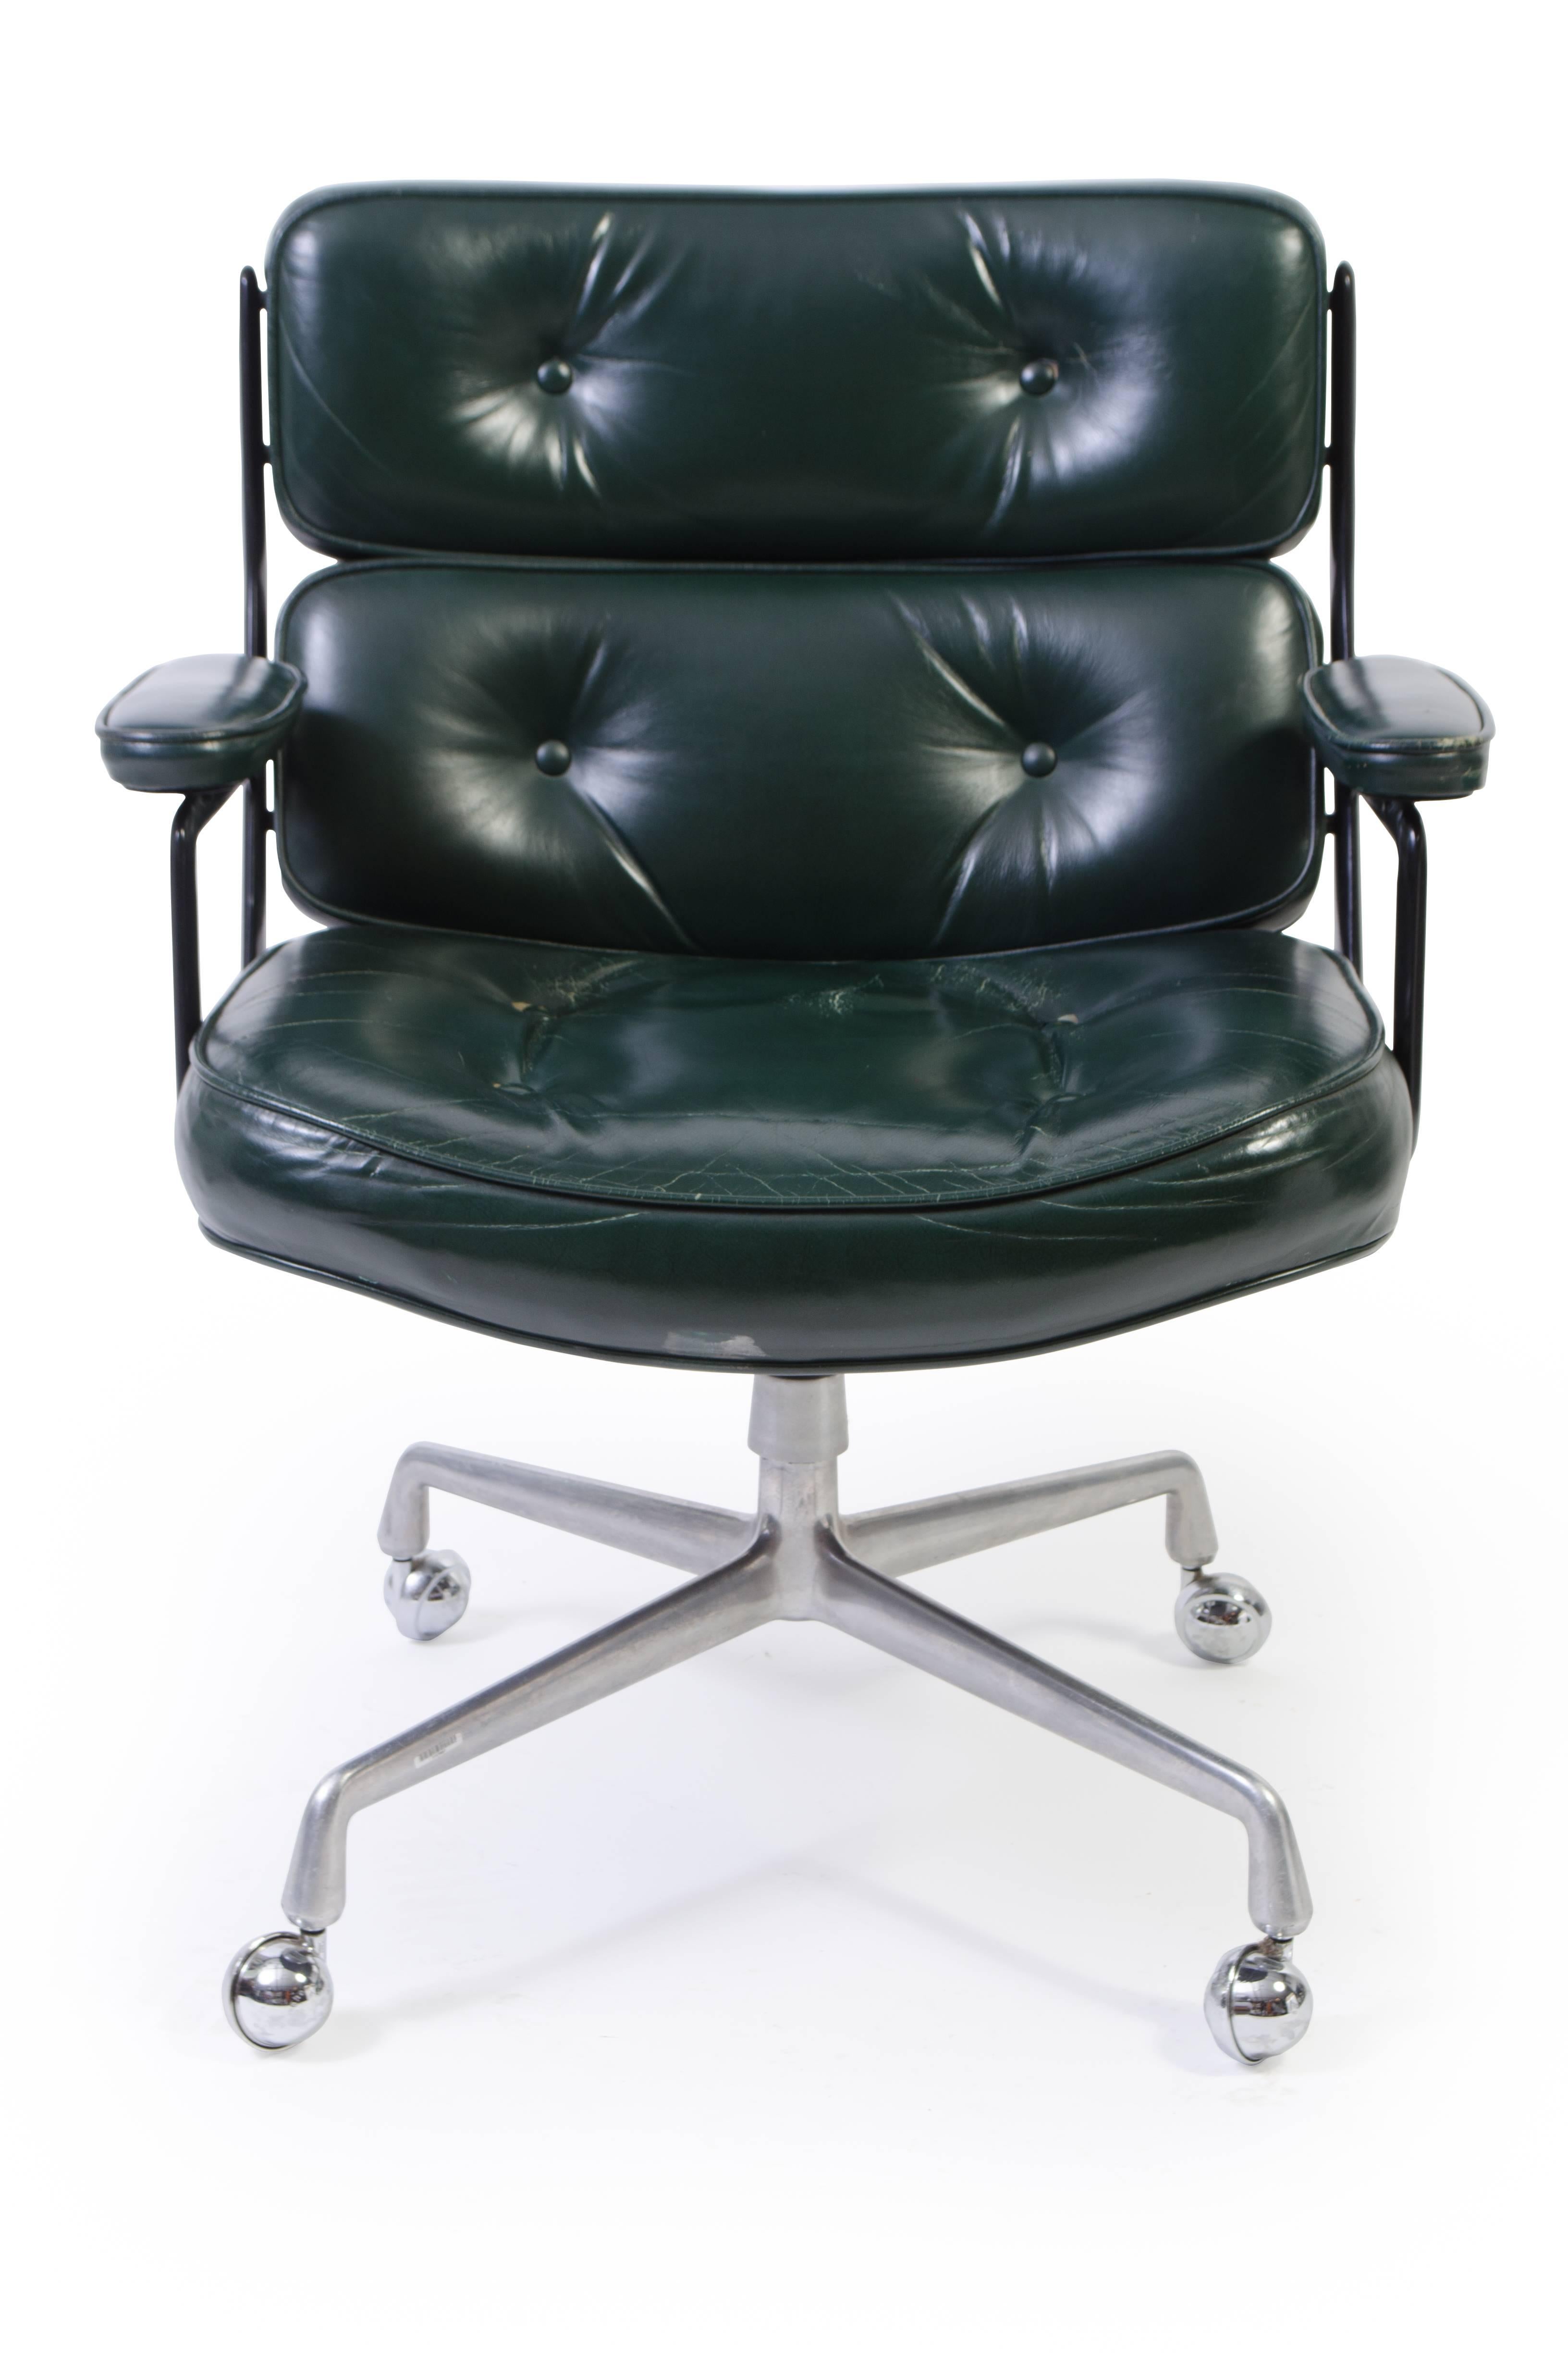 The epitome of executive seating from the Mid-Century, the Eames Executive Chair makes the biggest statement. Take this for a spin and feel like Don Draper, while having the time of your life! Speaking of which, this is also widely known as the time